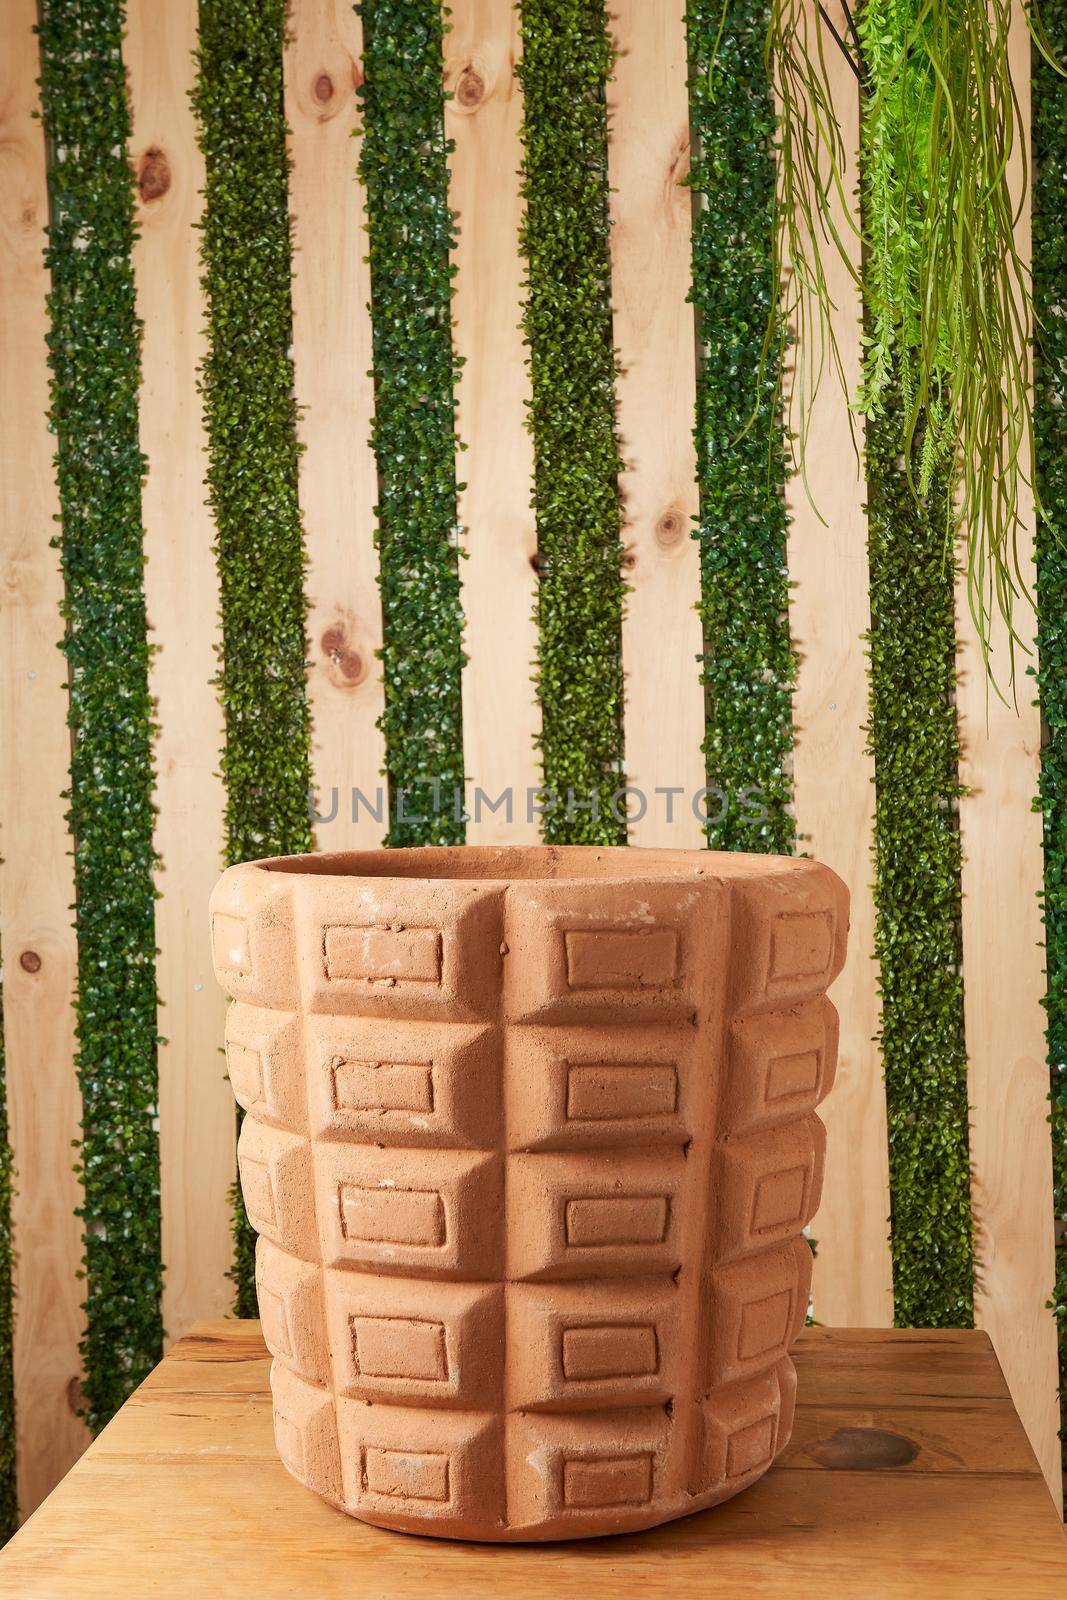 earthenware pot for plants on a wooden table with green plant background. catalog of plant pots. clay pot for plants.